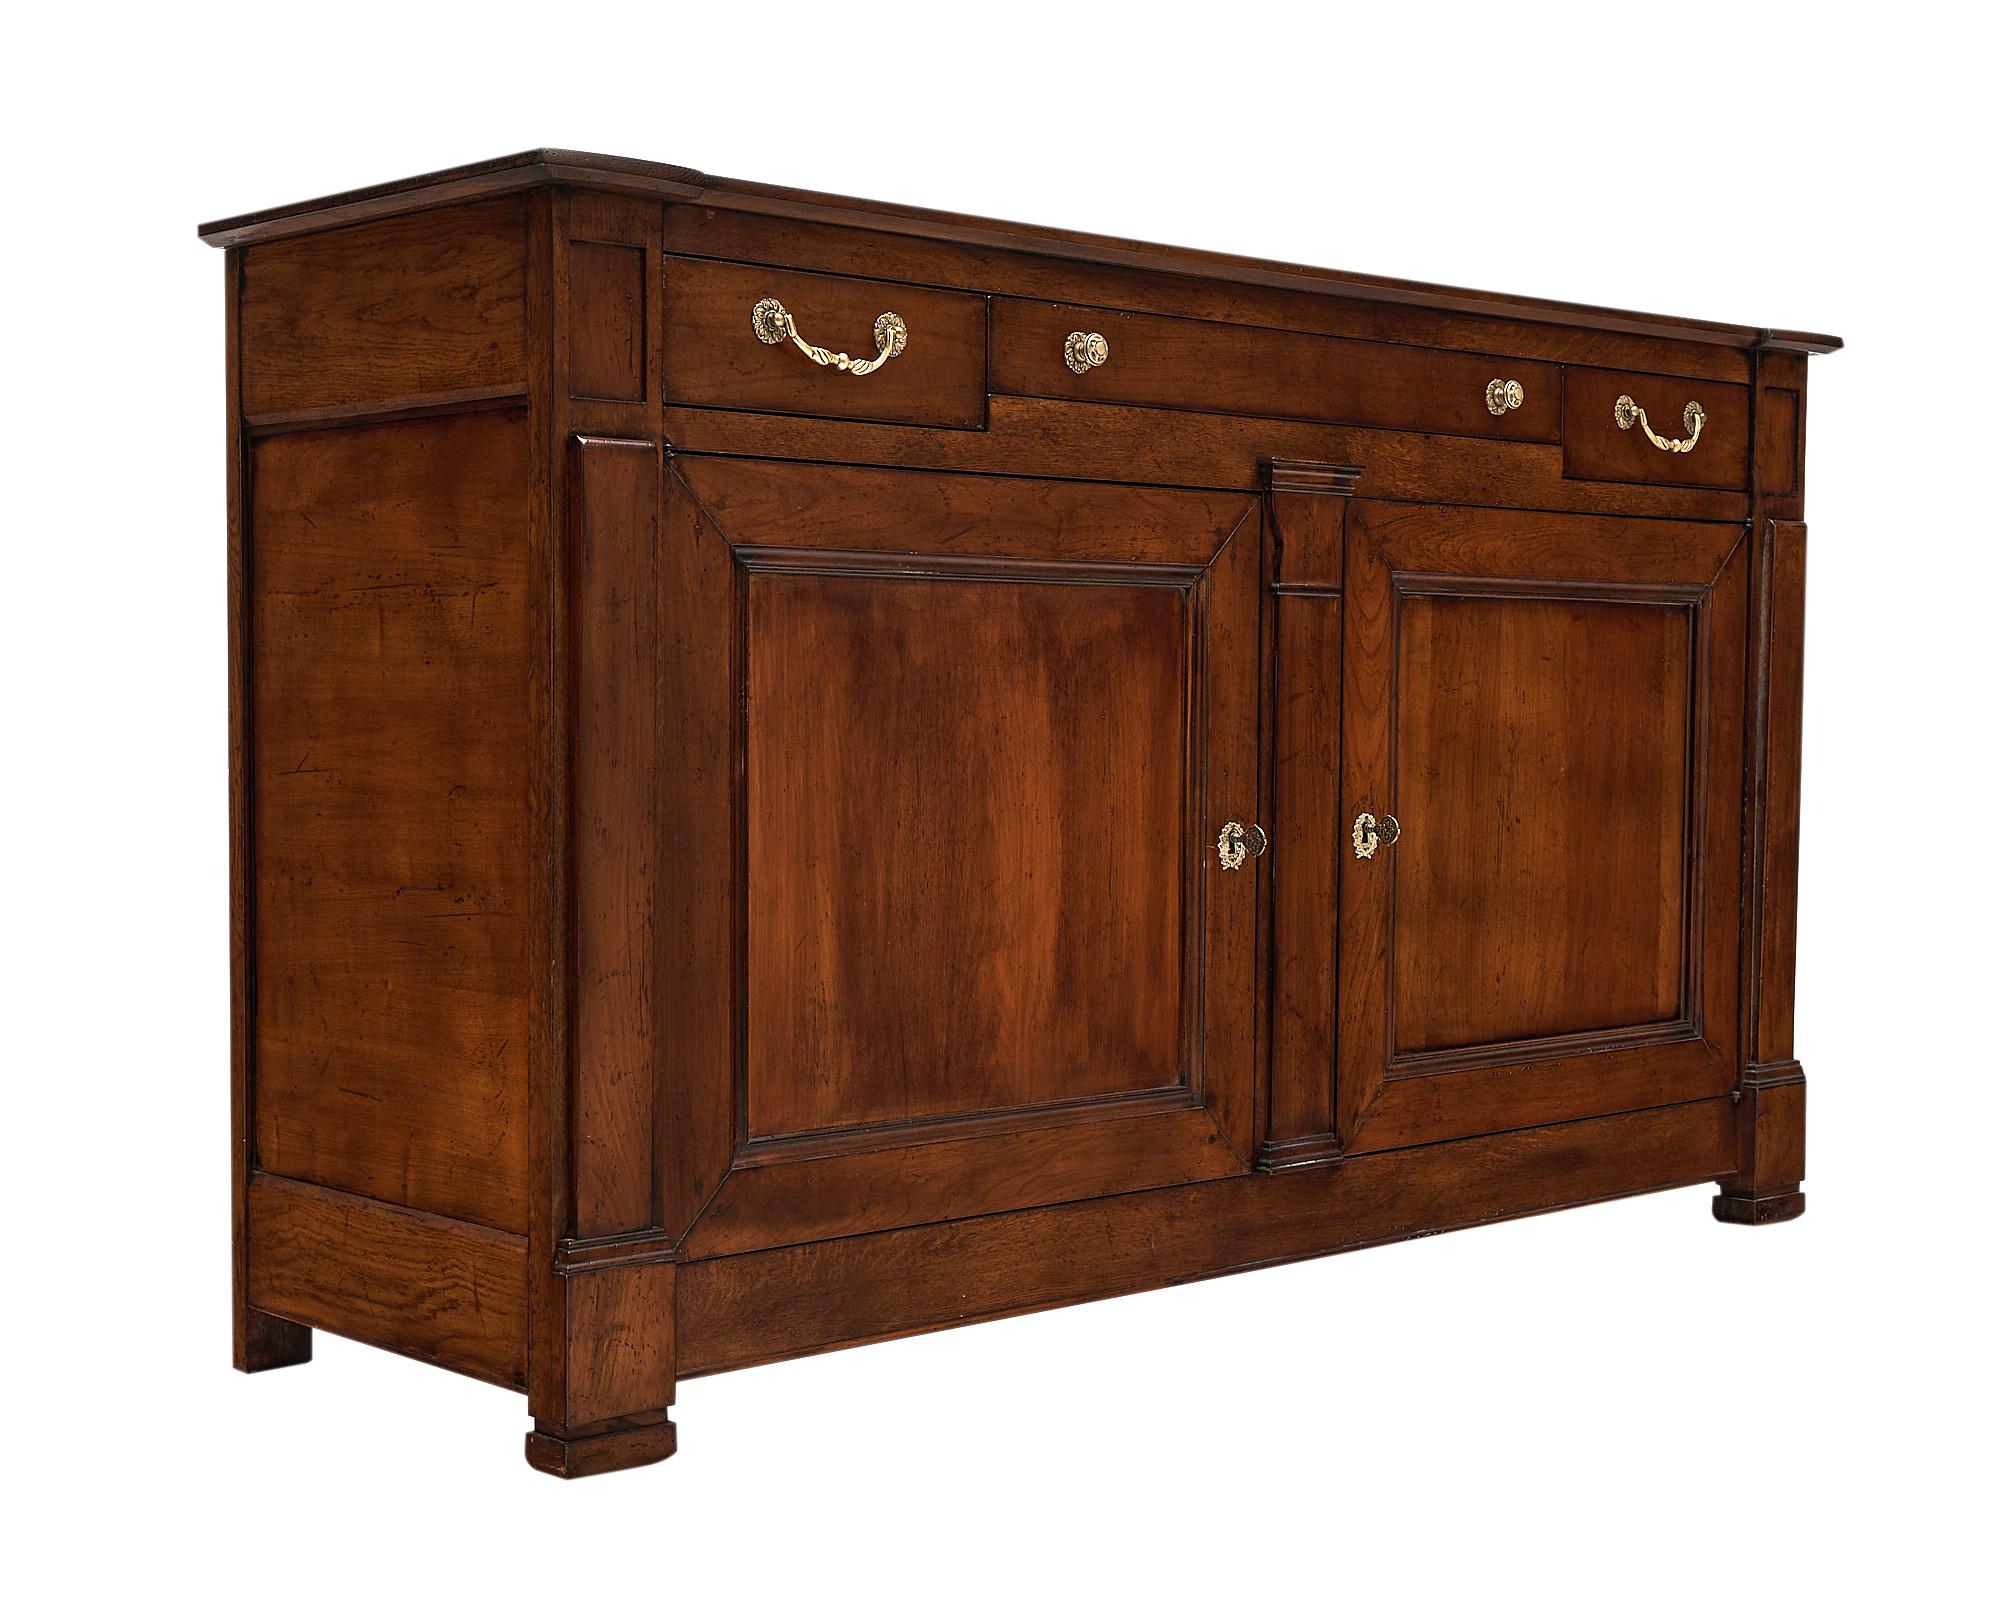 Buffet, French, made of solid walnut from the Rhone Valley in the Restoration style. This piece has two doors and three dovetailed drawers, all with bronze hardware. This elegant neoclassical provincial sideboard is finished in a lustrous bee wax